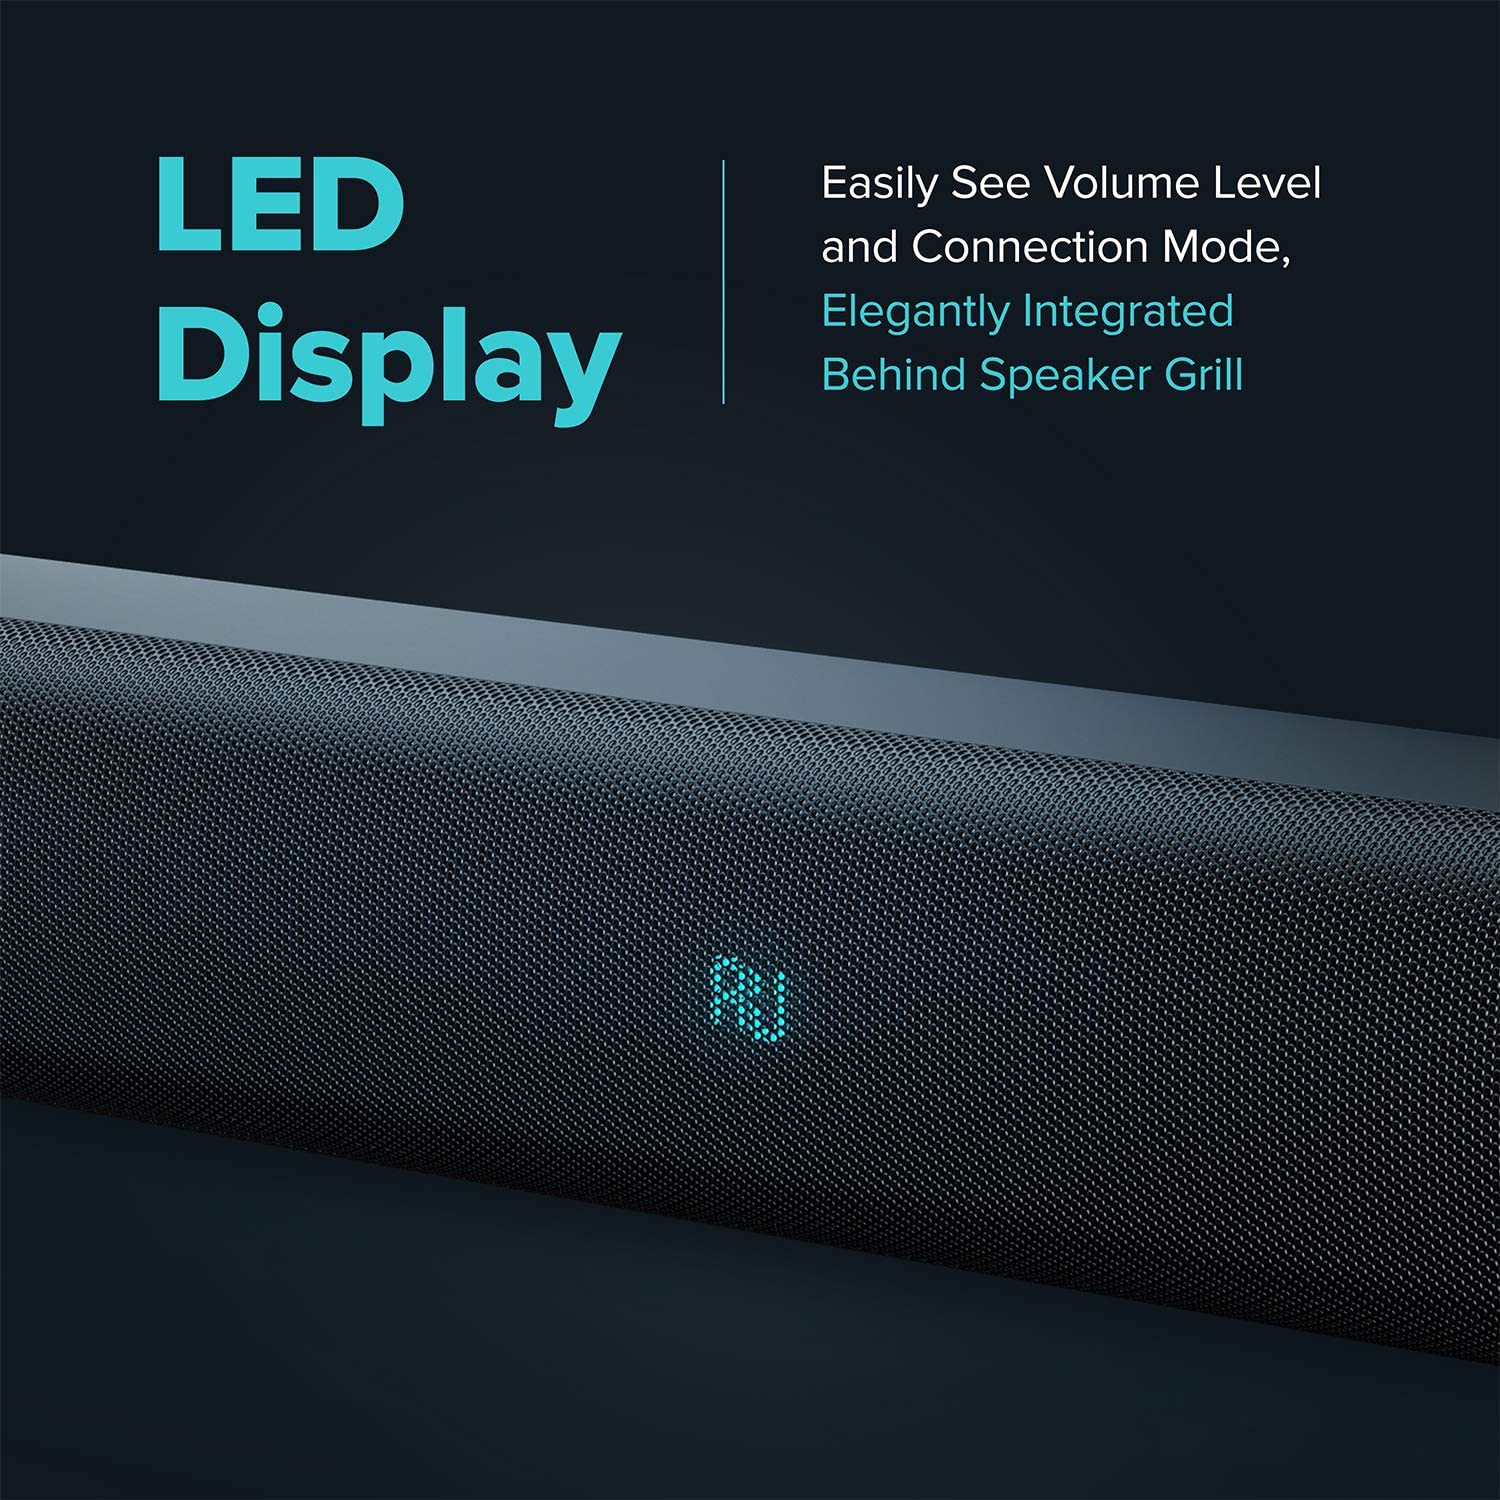 RIF6 Sound Bar - 35 Inch Home Theater TV Soundbar with LED Display, Dual Built-in Subwoofers and 4 Equalizer Settings - Connects to Bluetooth, HDMI, AUX, RCA and USB